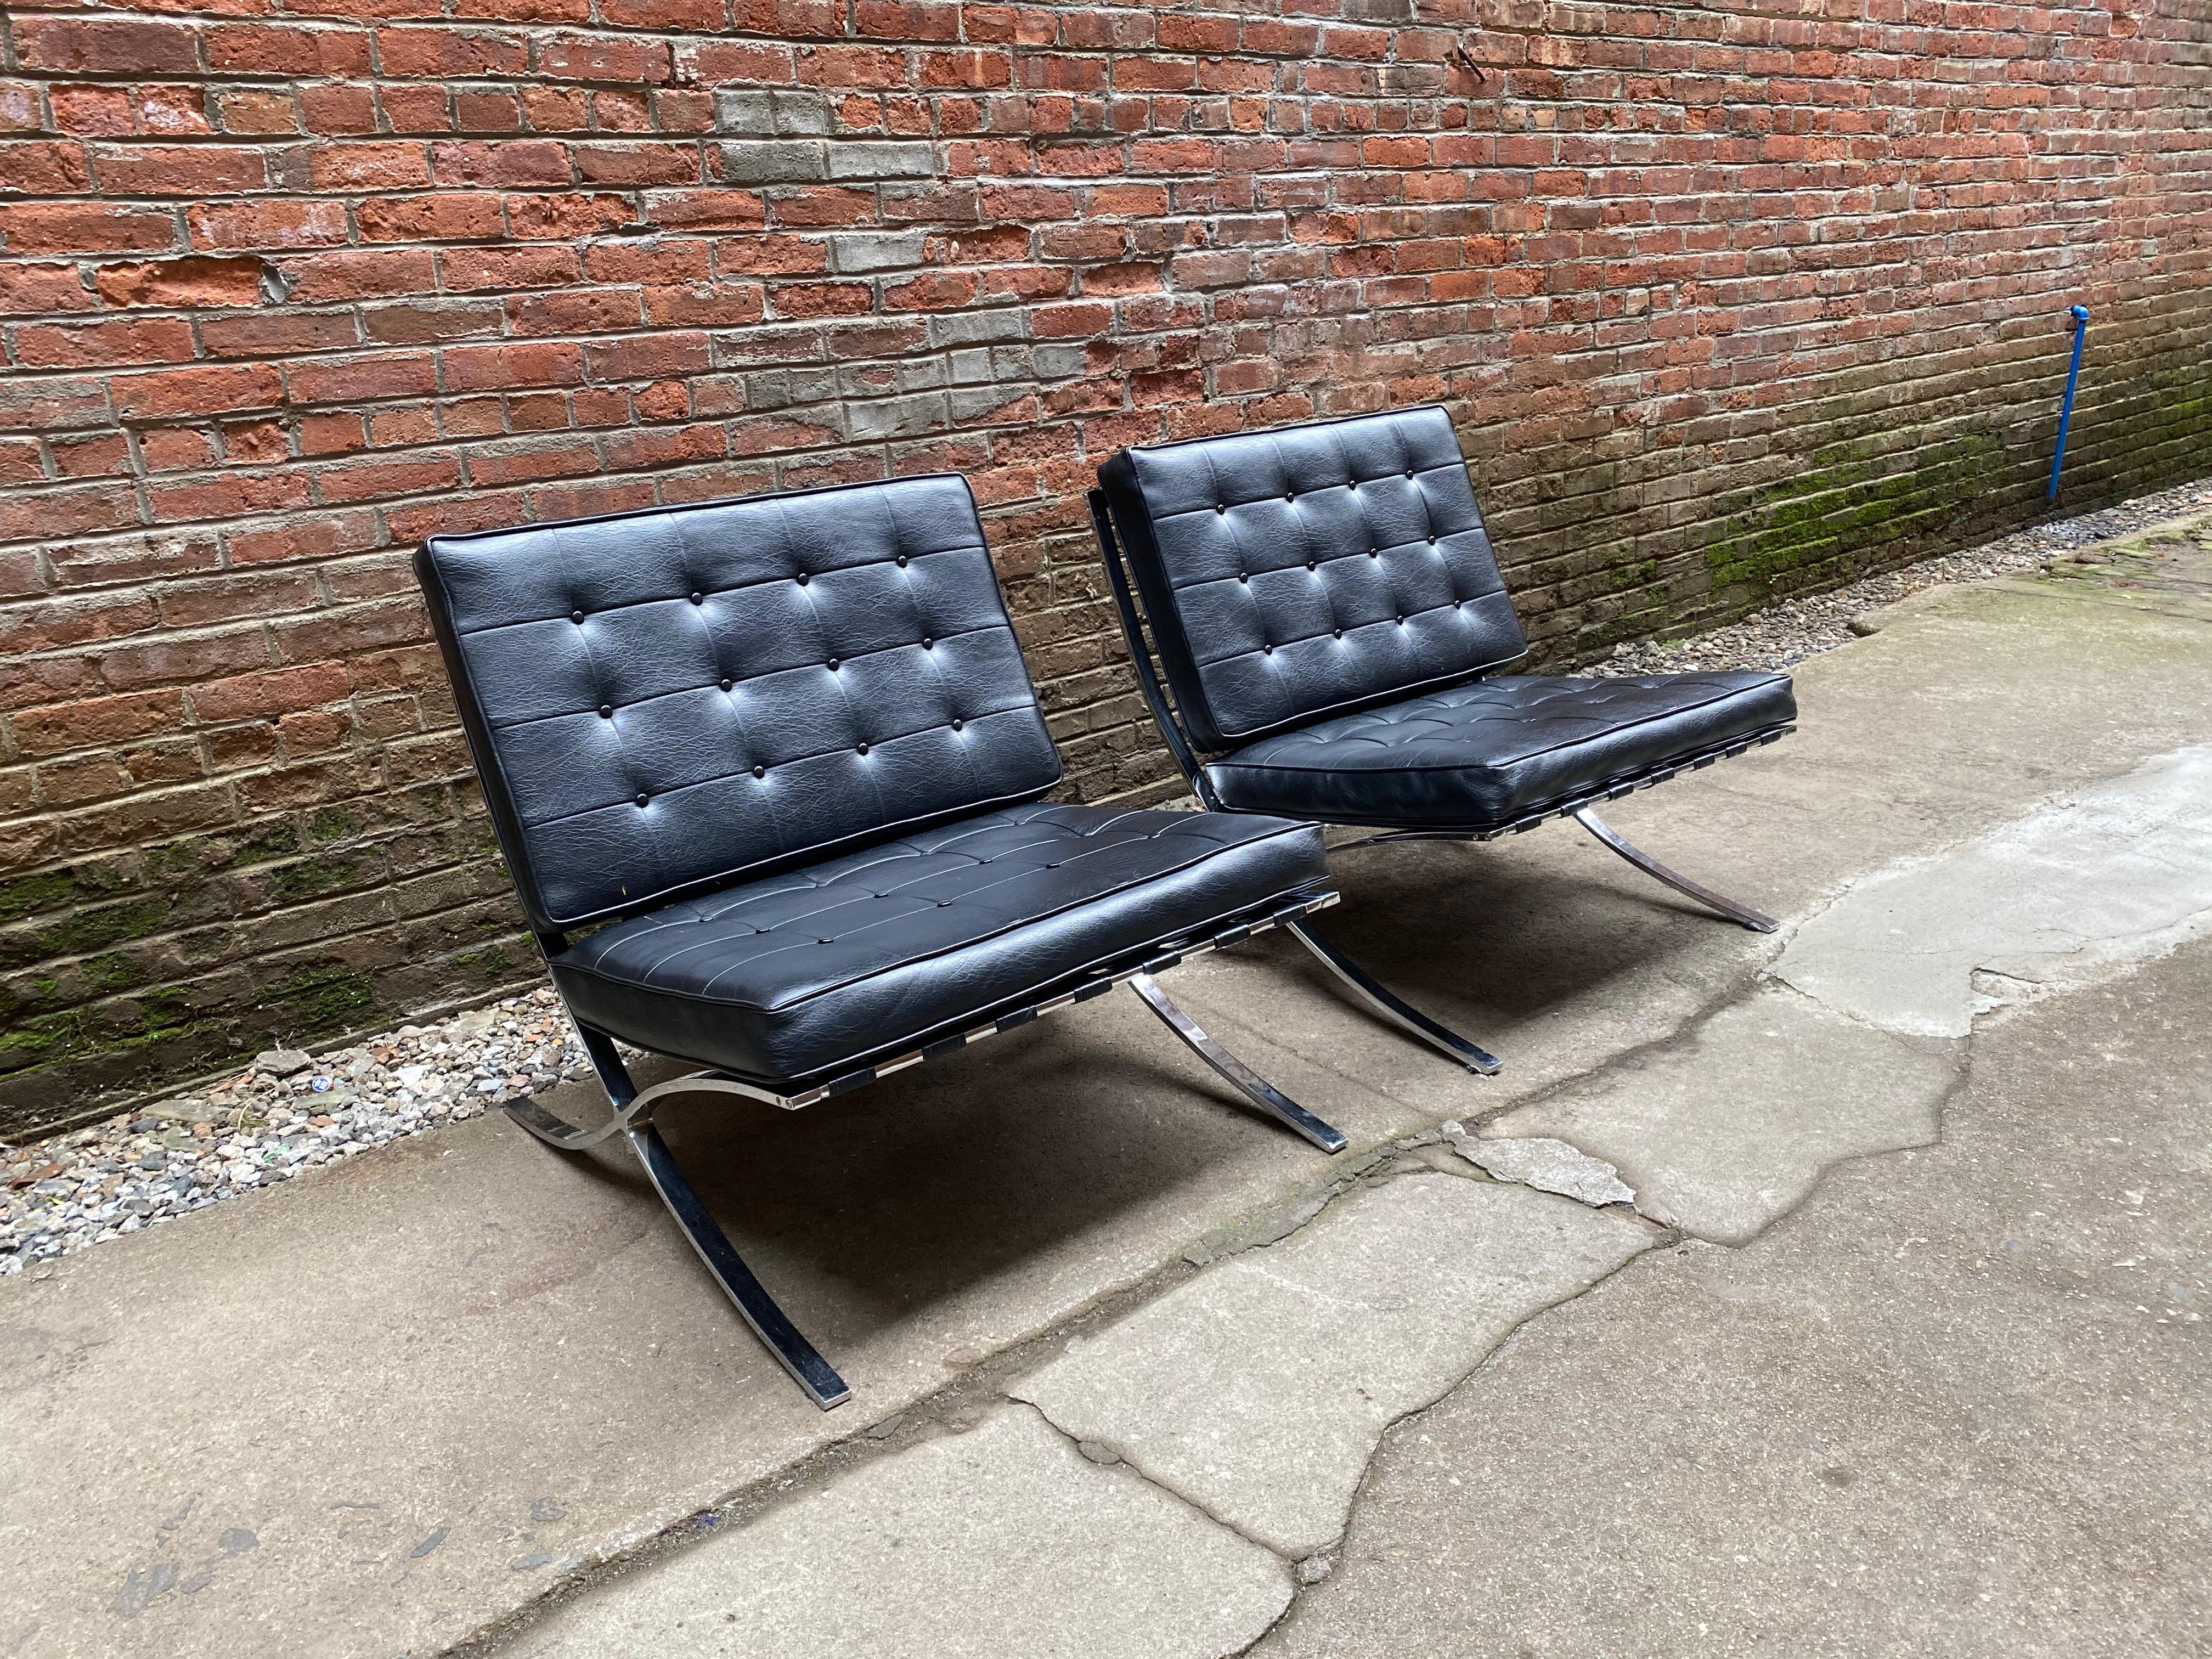 A fine pair of Barcelona style lounge chairs for Chris Boyce Associates, Orange, California. Chrome-plated flat bar steel chairs with the original tufted black vinyl cushions, circa 1970-1980. Very clean and good condition. Still bares the original